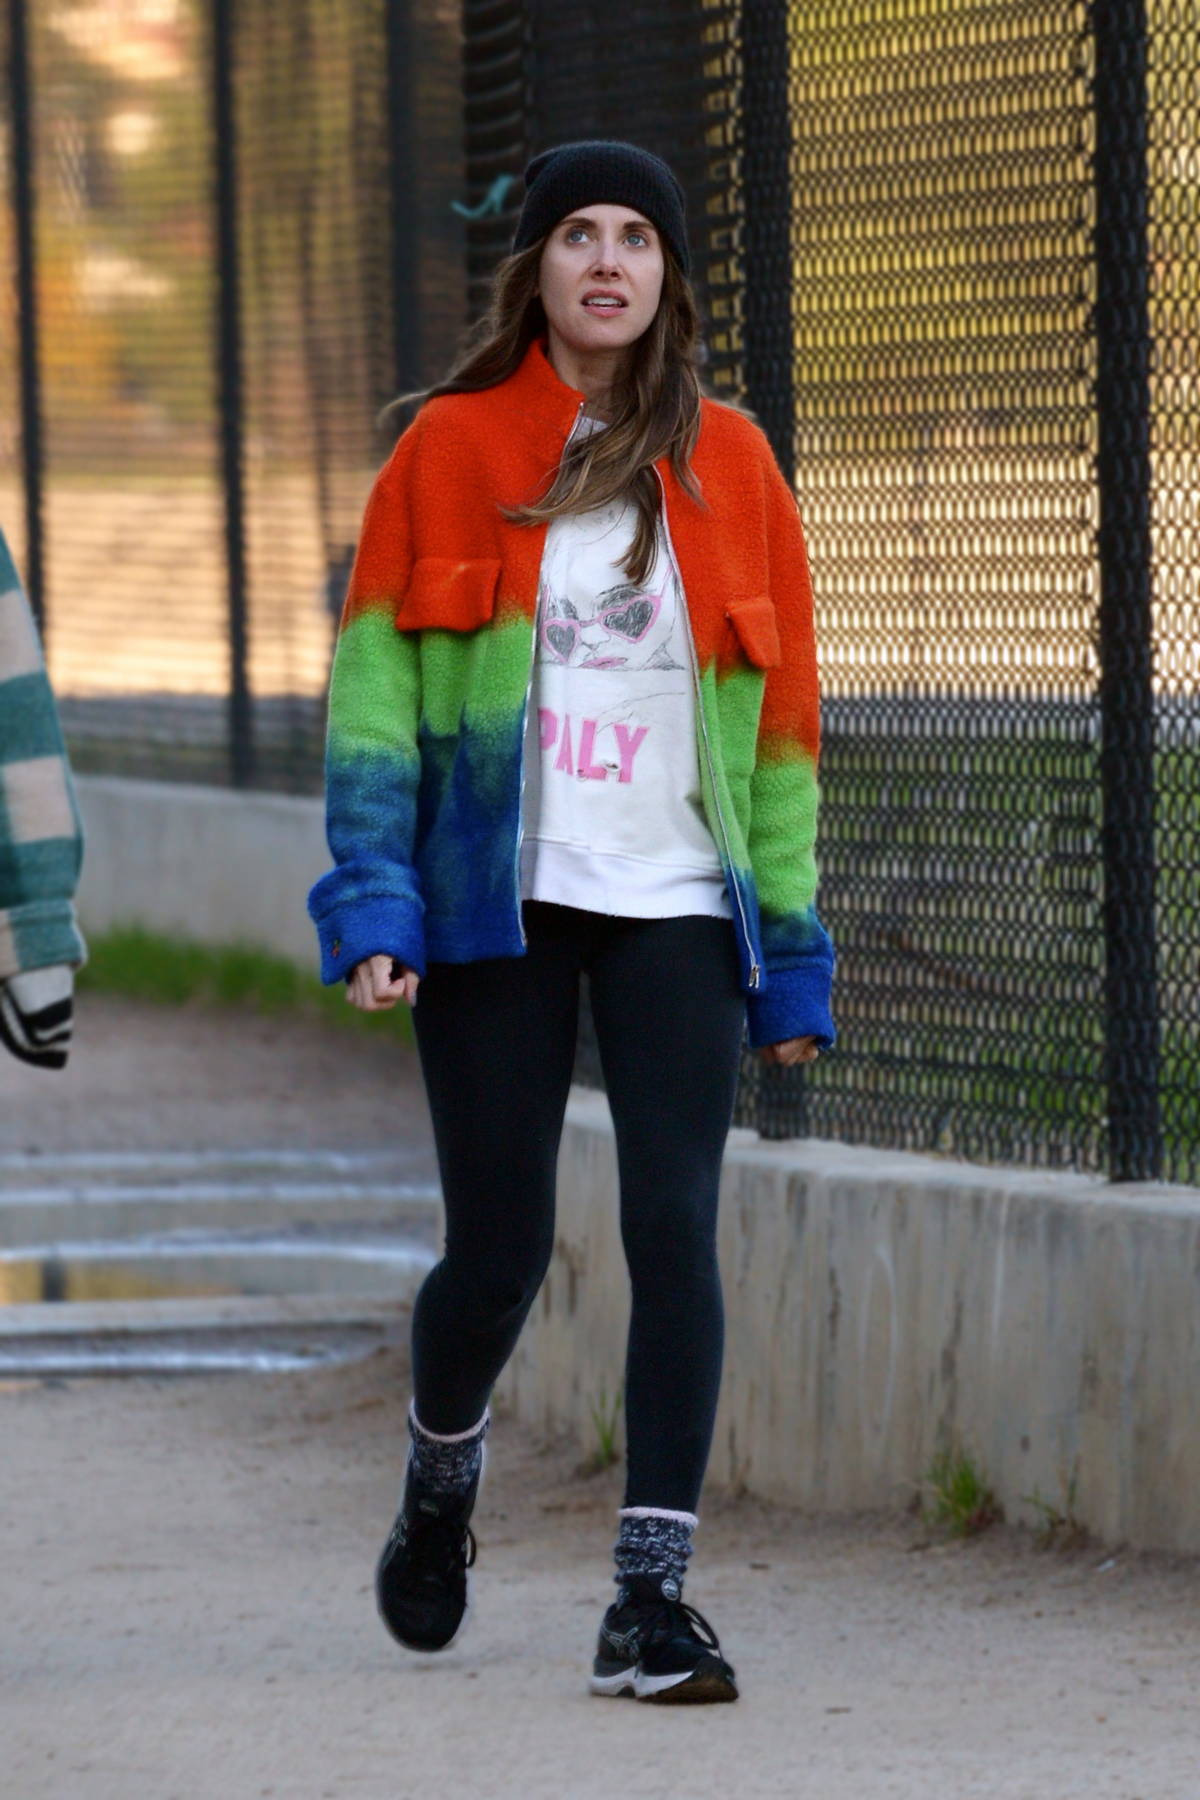 alison brie wears a colorful fleece and black leggings as she goes